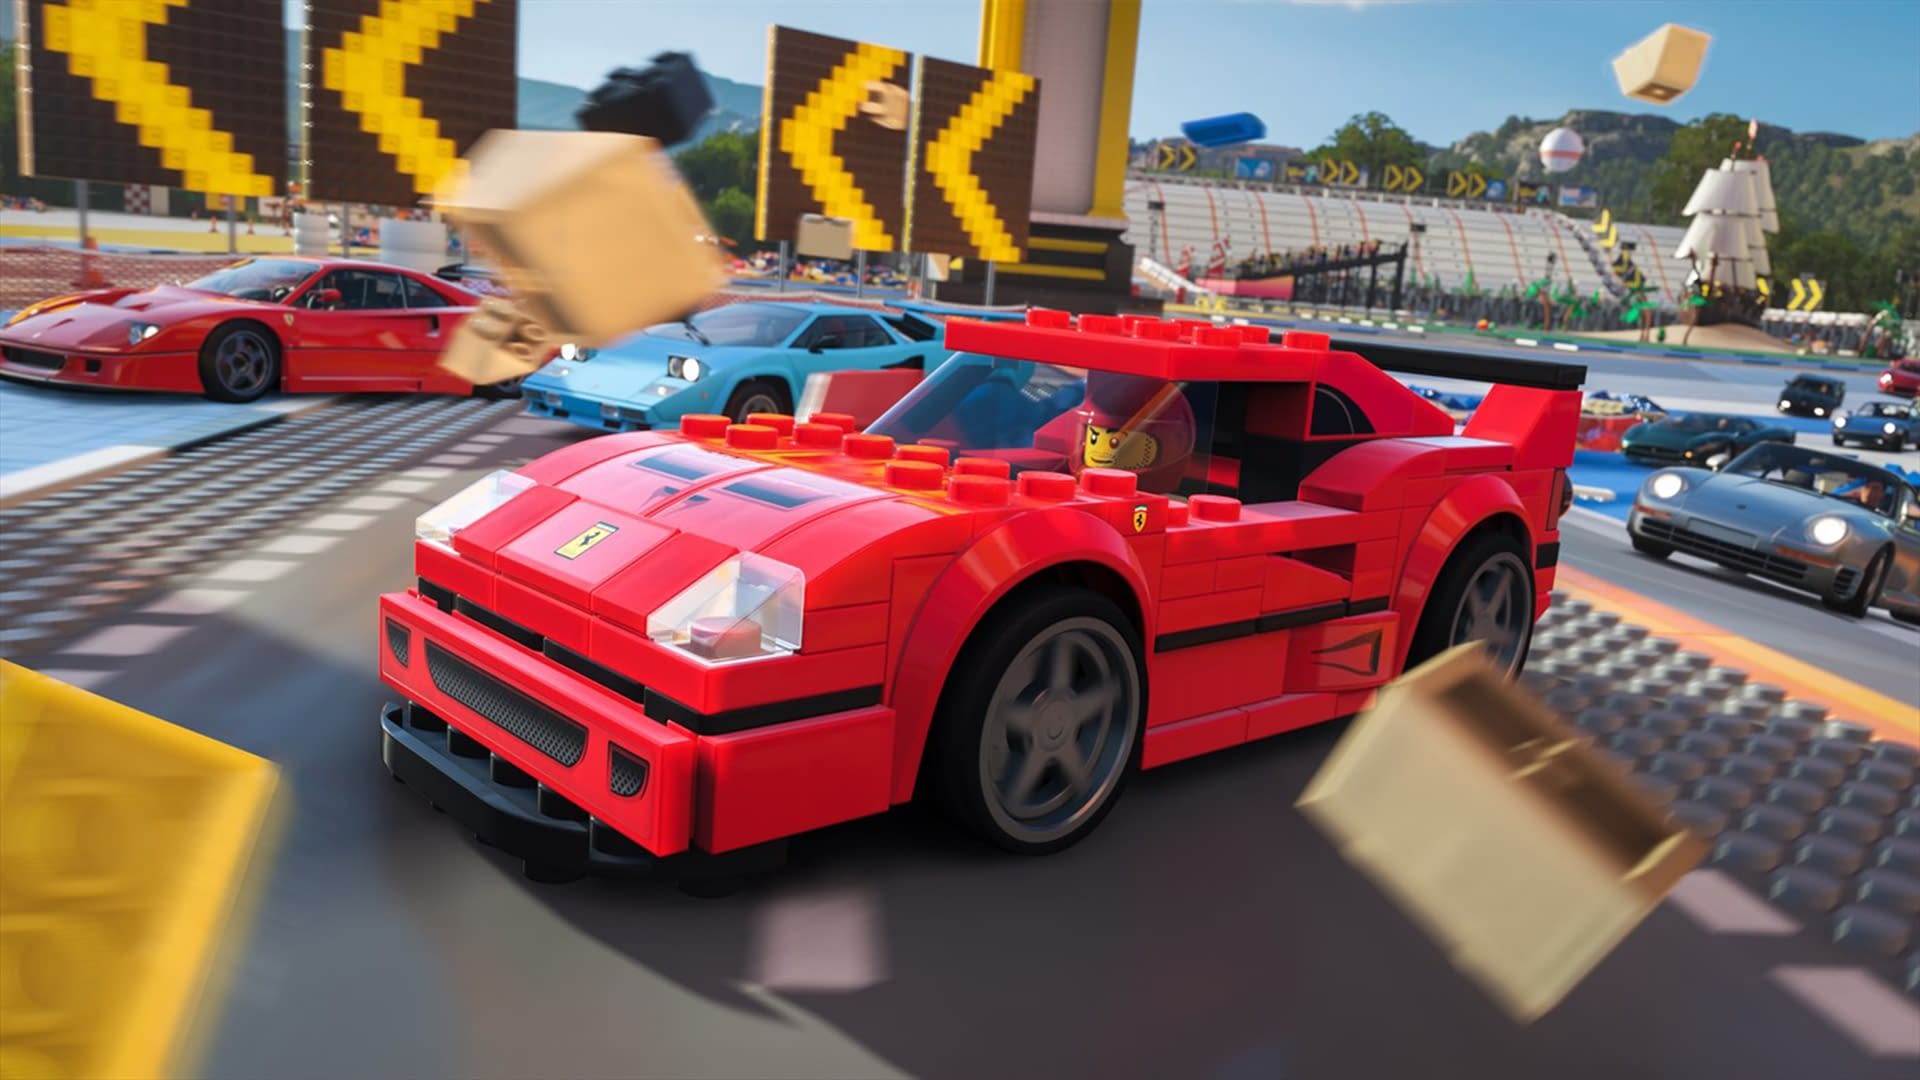 The new Lego-themed racing game was reported to be in beta